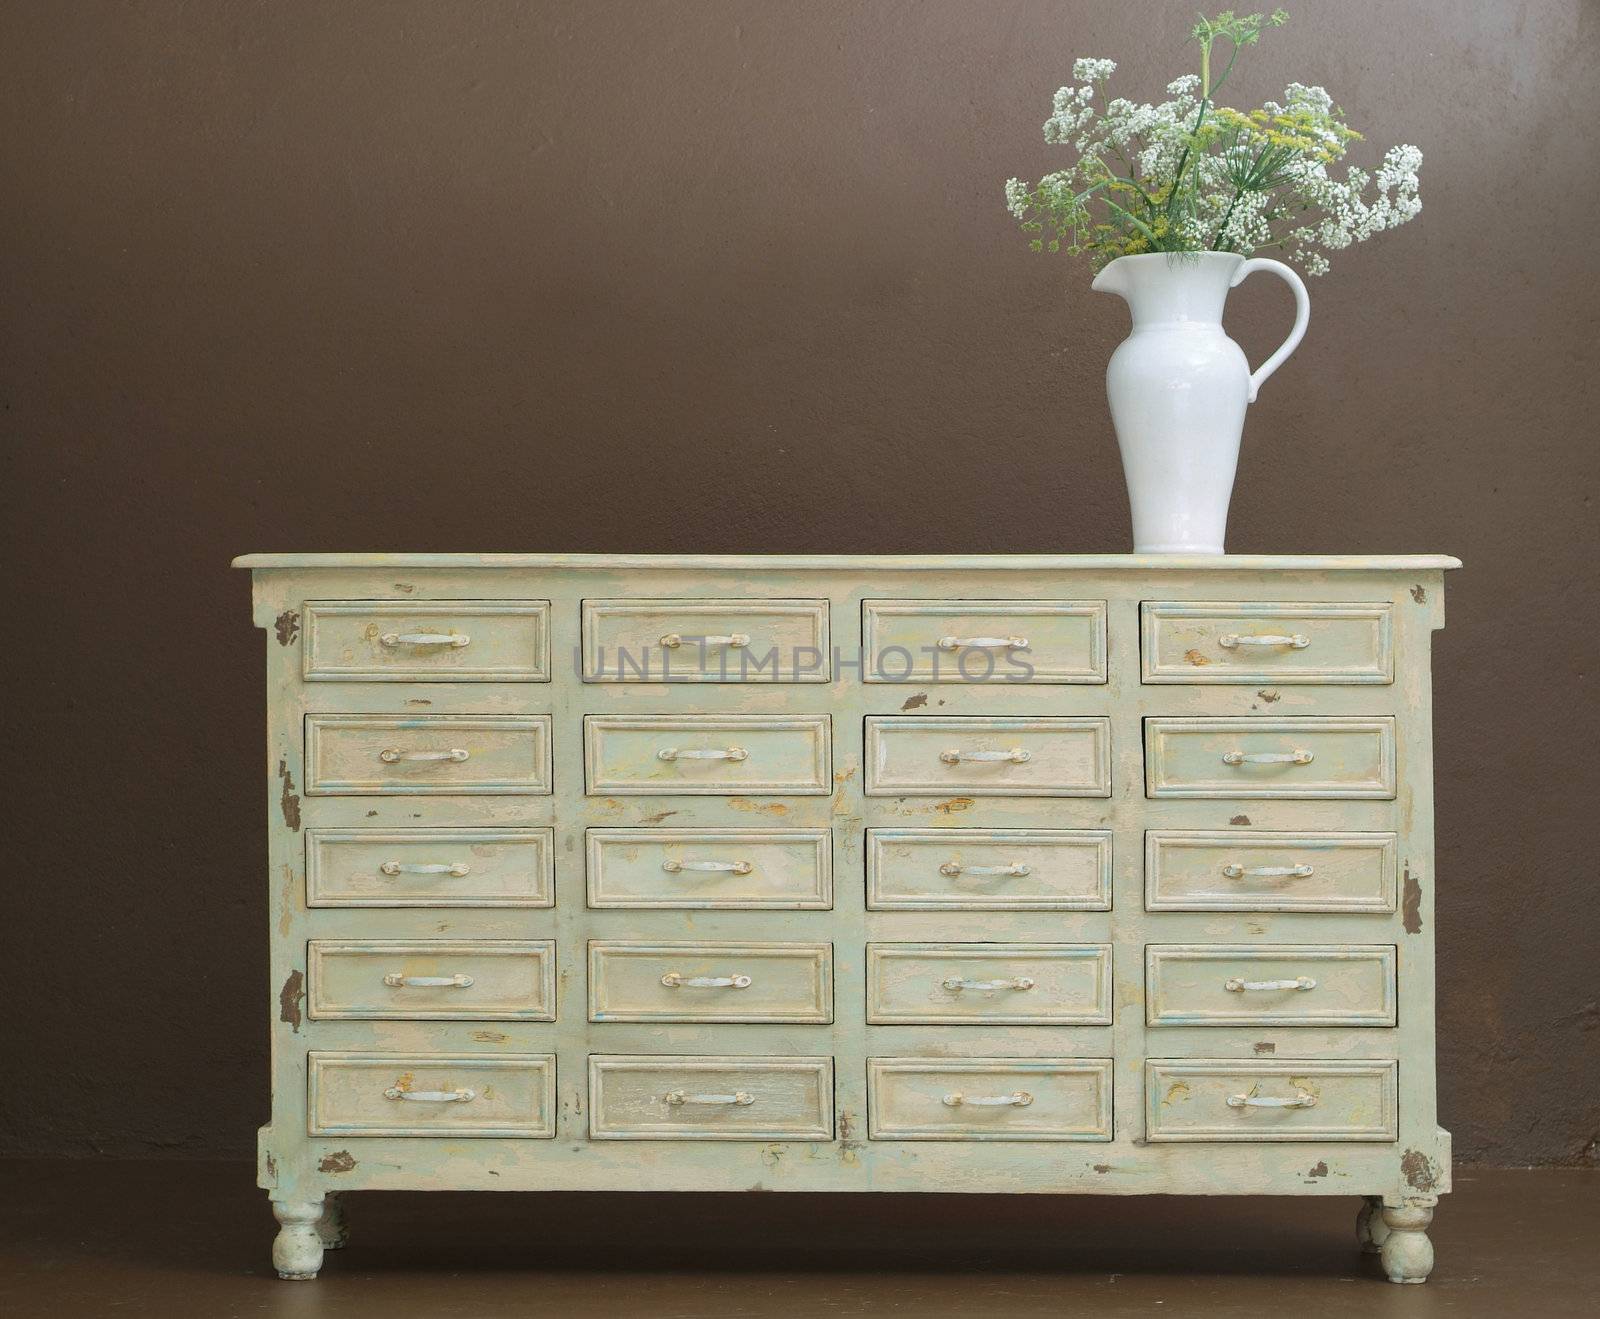 Hand crafted classic wooden dresser